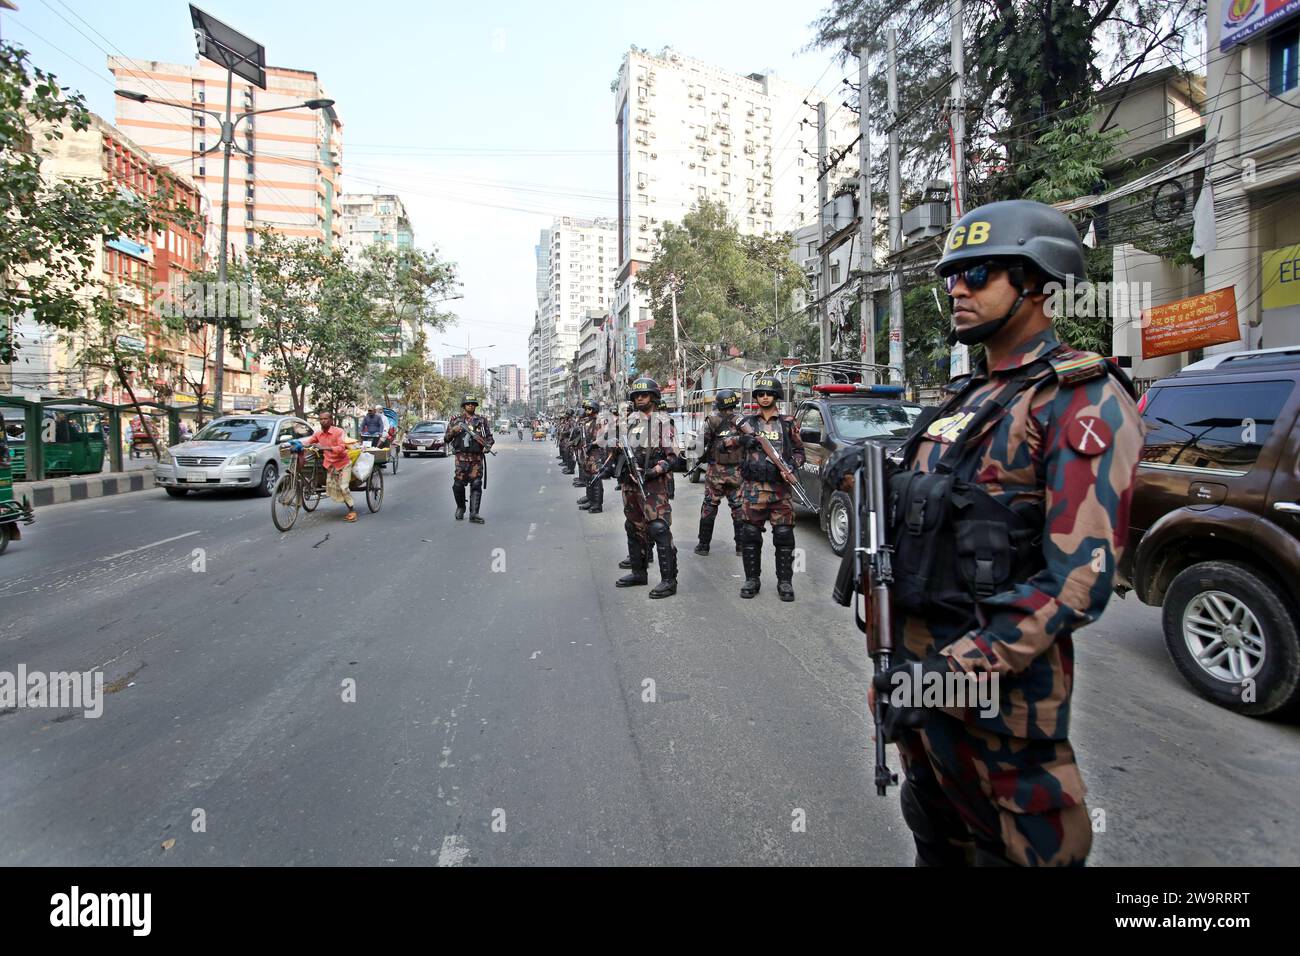 Members Of Border Guard Bangladesh (BGB) Stand Guard In A Street For The Upcoming 12th General Election In Dhaka, Bangladesh On December 30, 2023. Ele Stock Photo